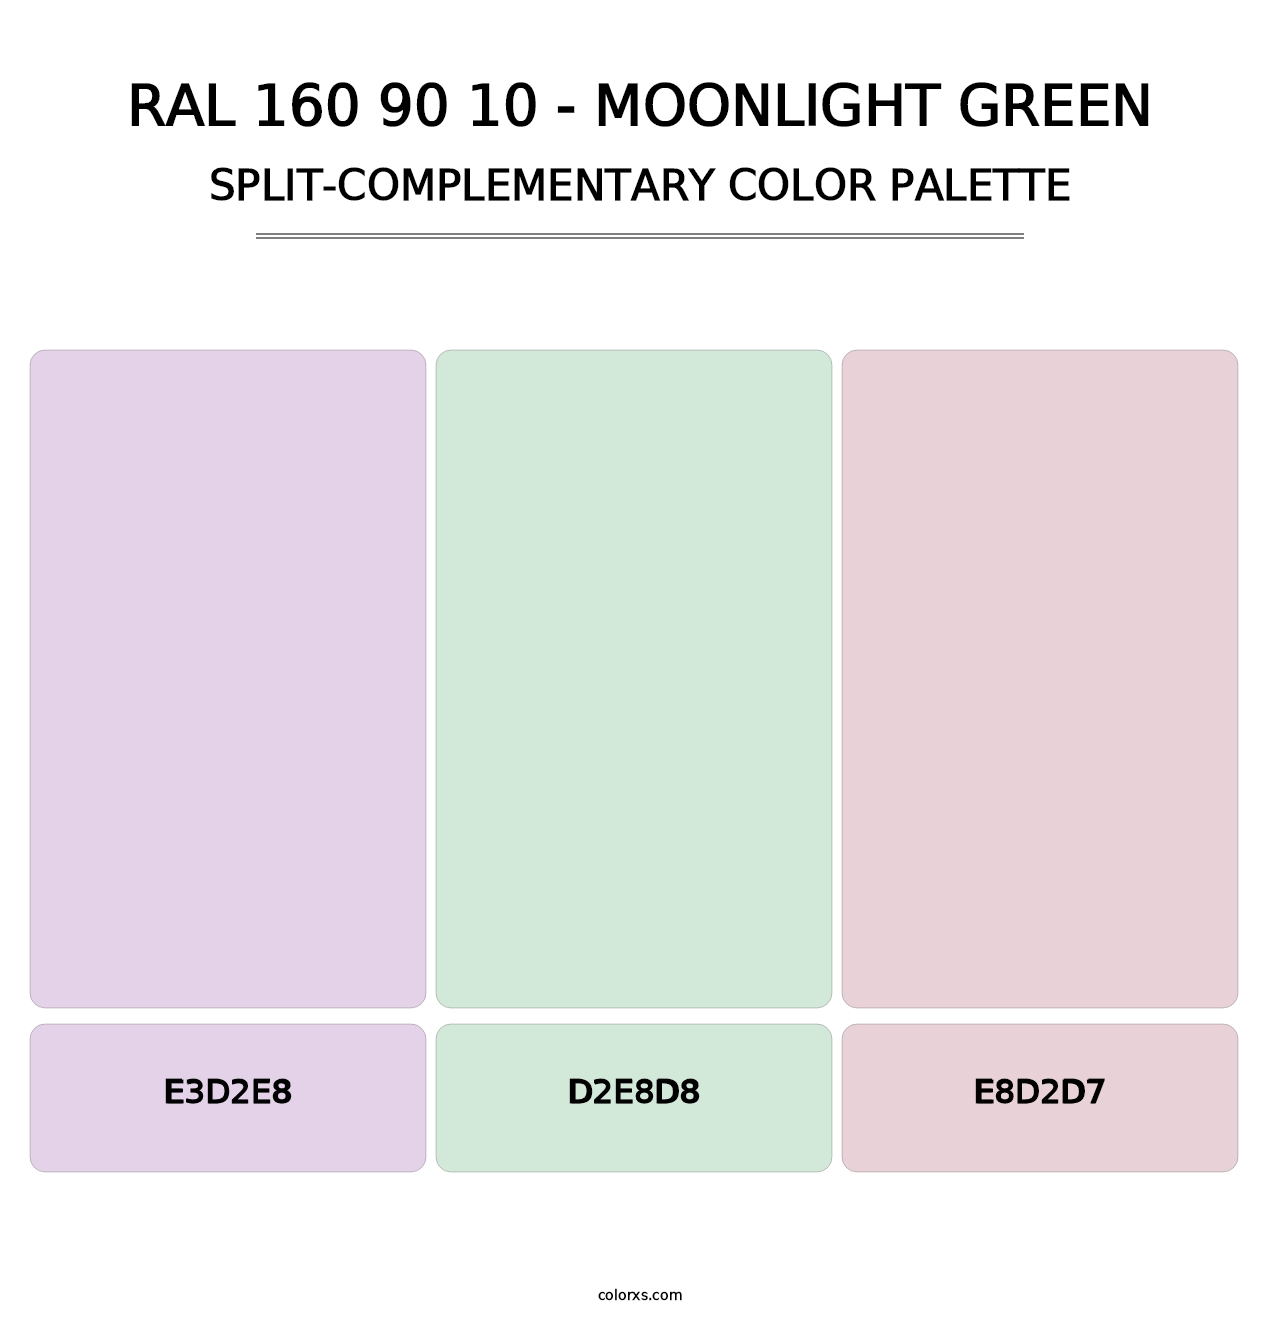 RAL 160 90 10 - Moonlight Green - Split-Complementary Color Palette